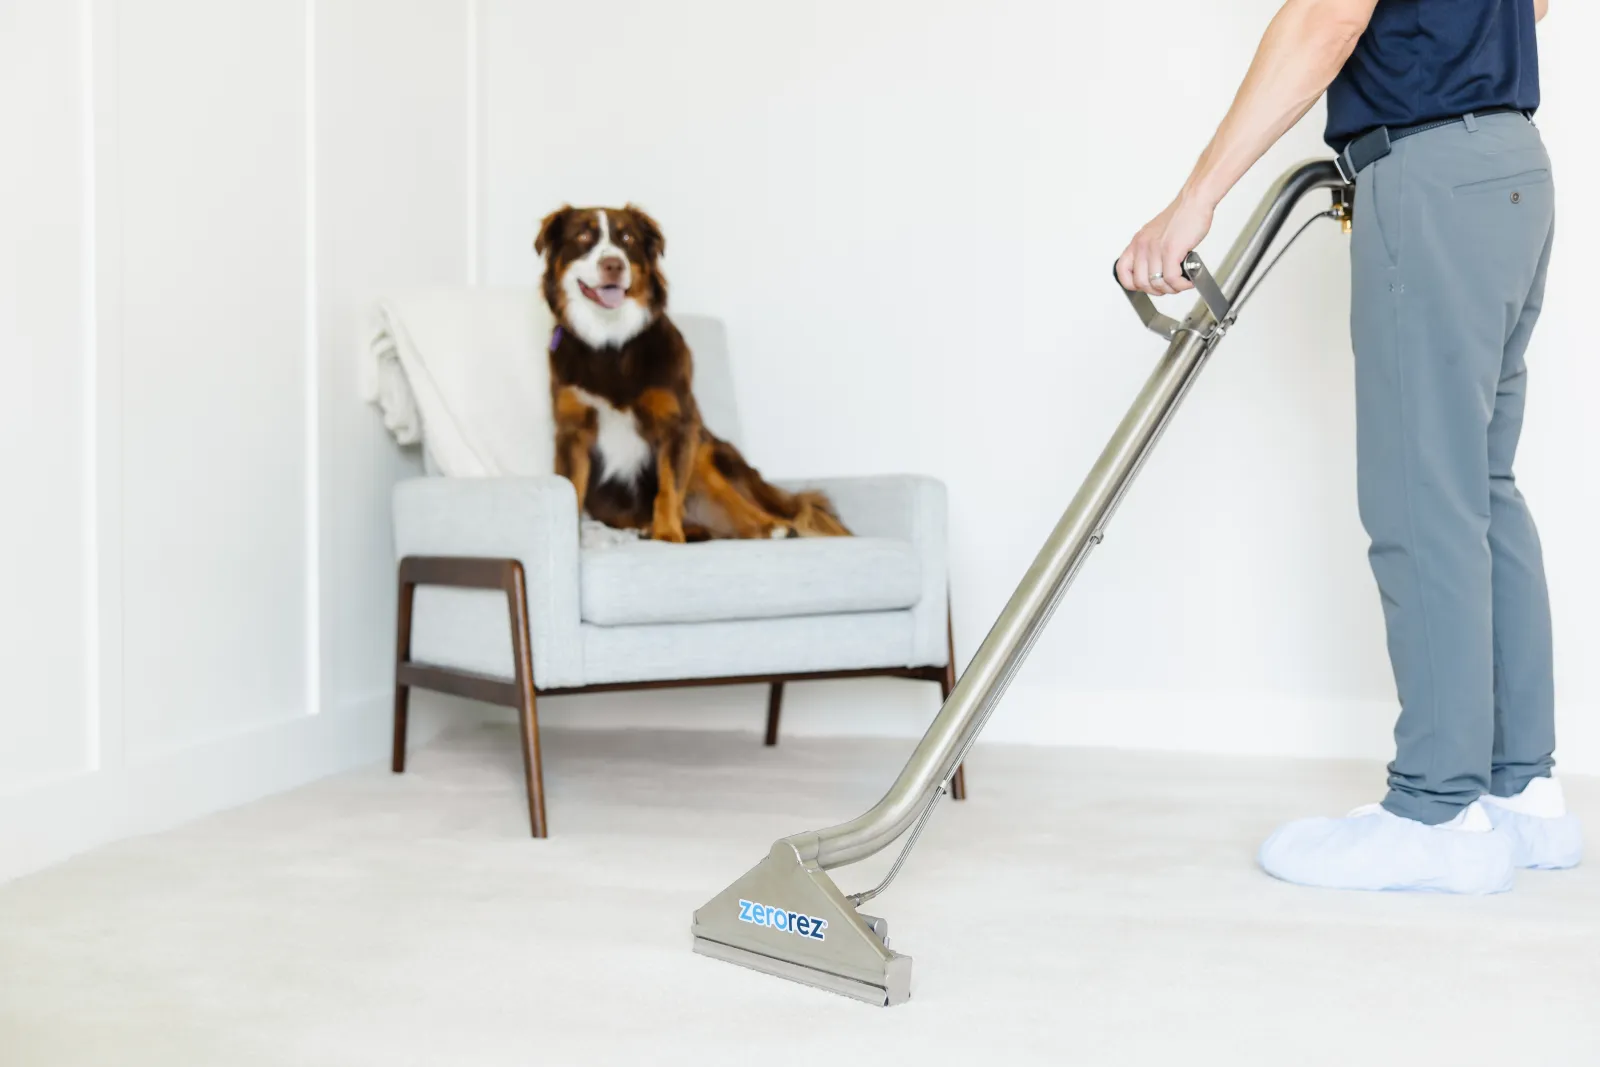 A Zerorez® technician using a Zr™ Wand to clean up a pet spot stain on a white carpet, cleaning while a dog watches from its perch on a white chair in the background